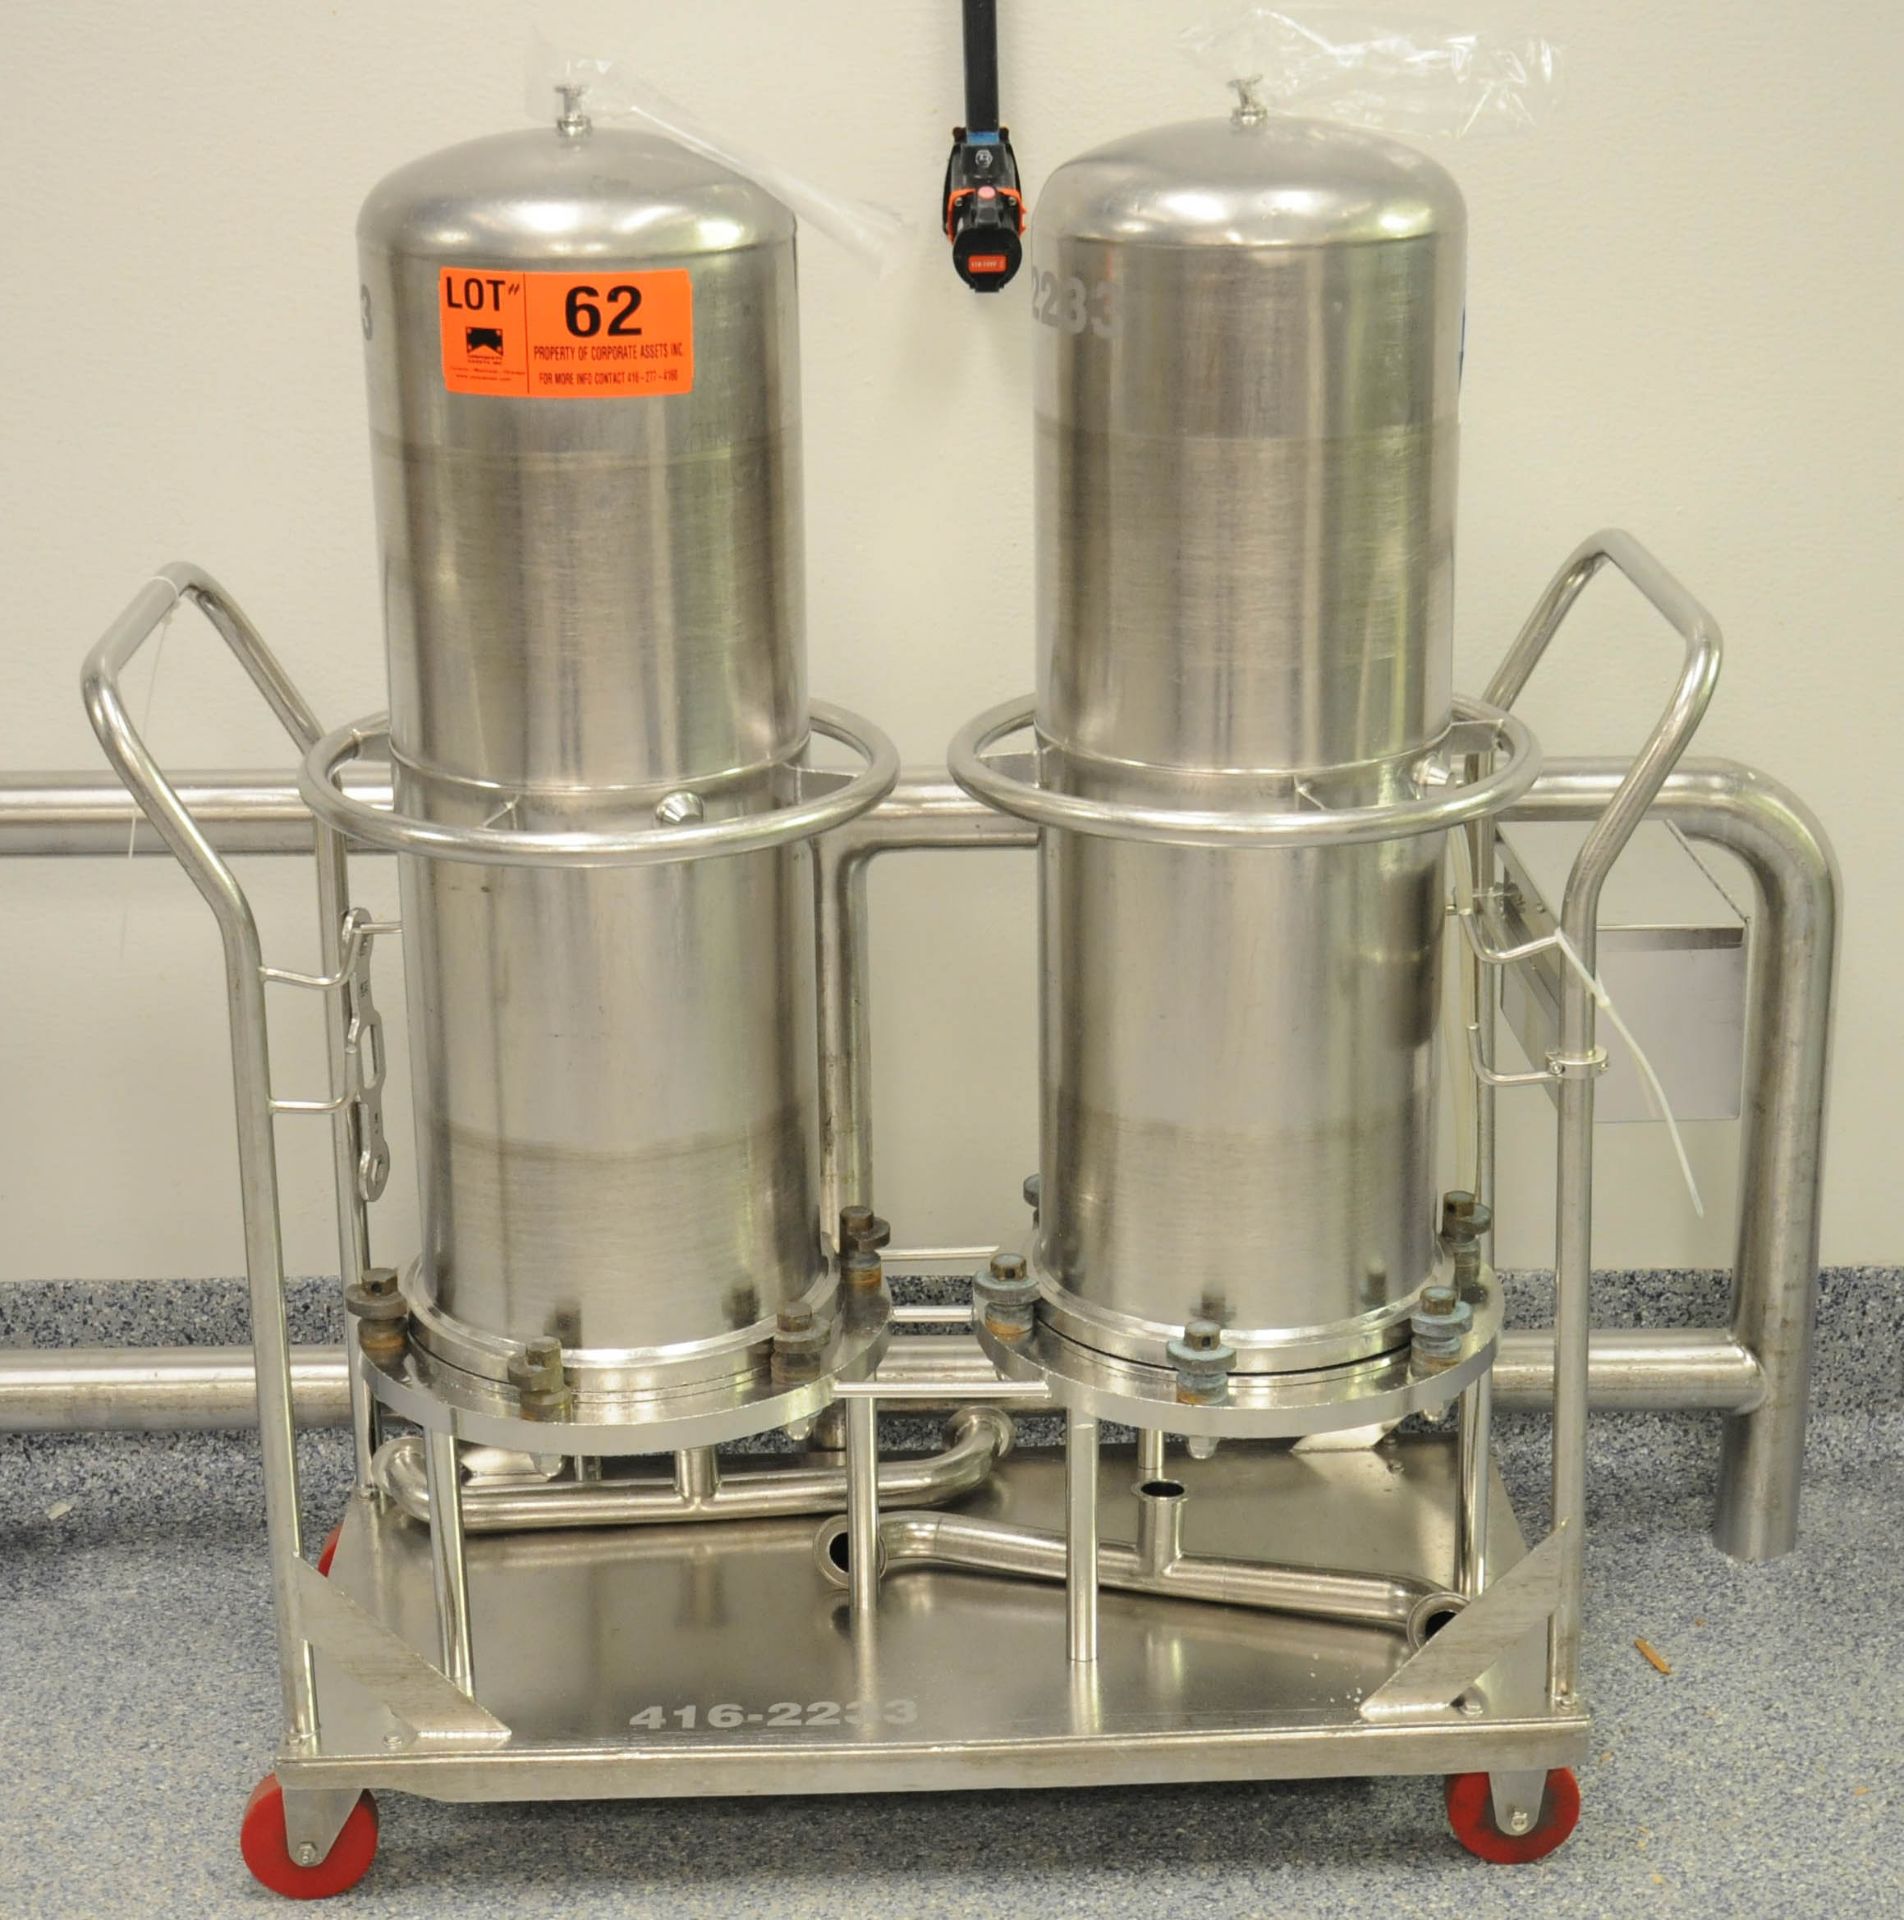 CUNO STAINLESS STEEL PORTABLE FILTRATION UNITS S/N N/A (416.2233) (RM 361)